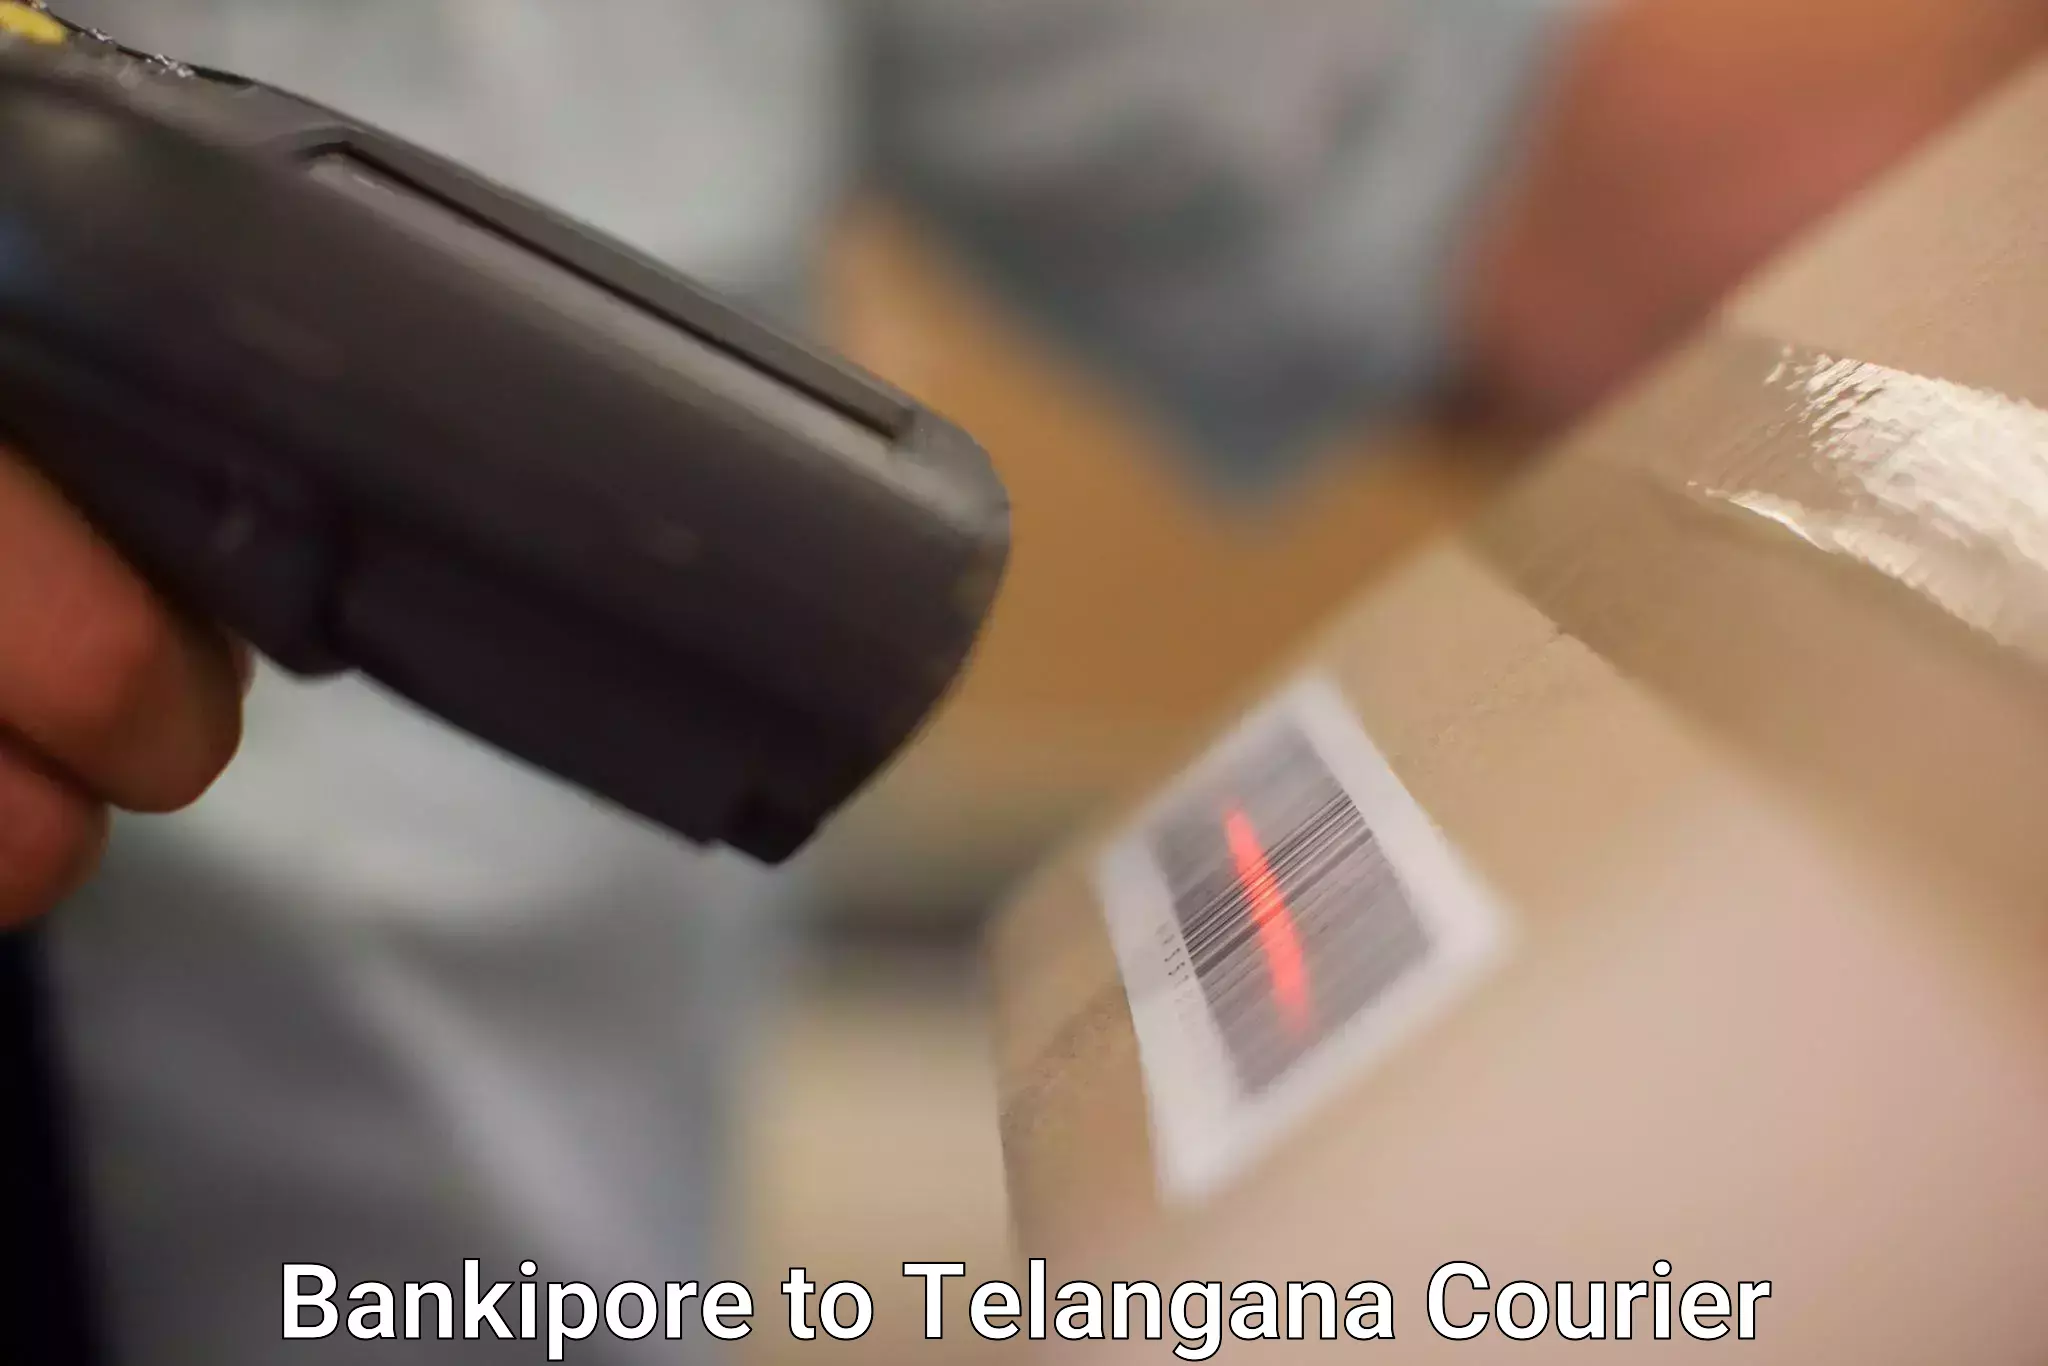 24-hour courier service in Bankipore to Amangal